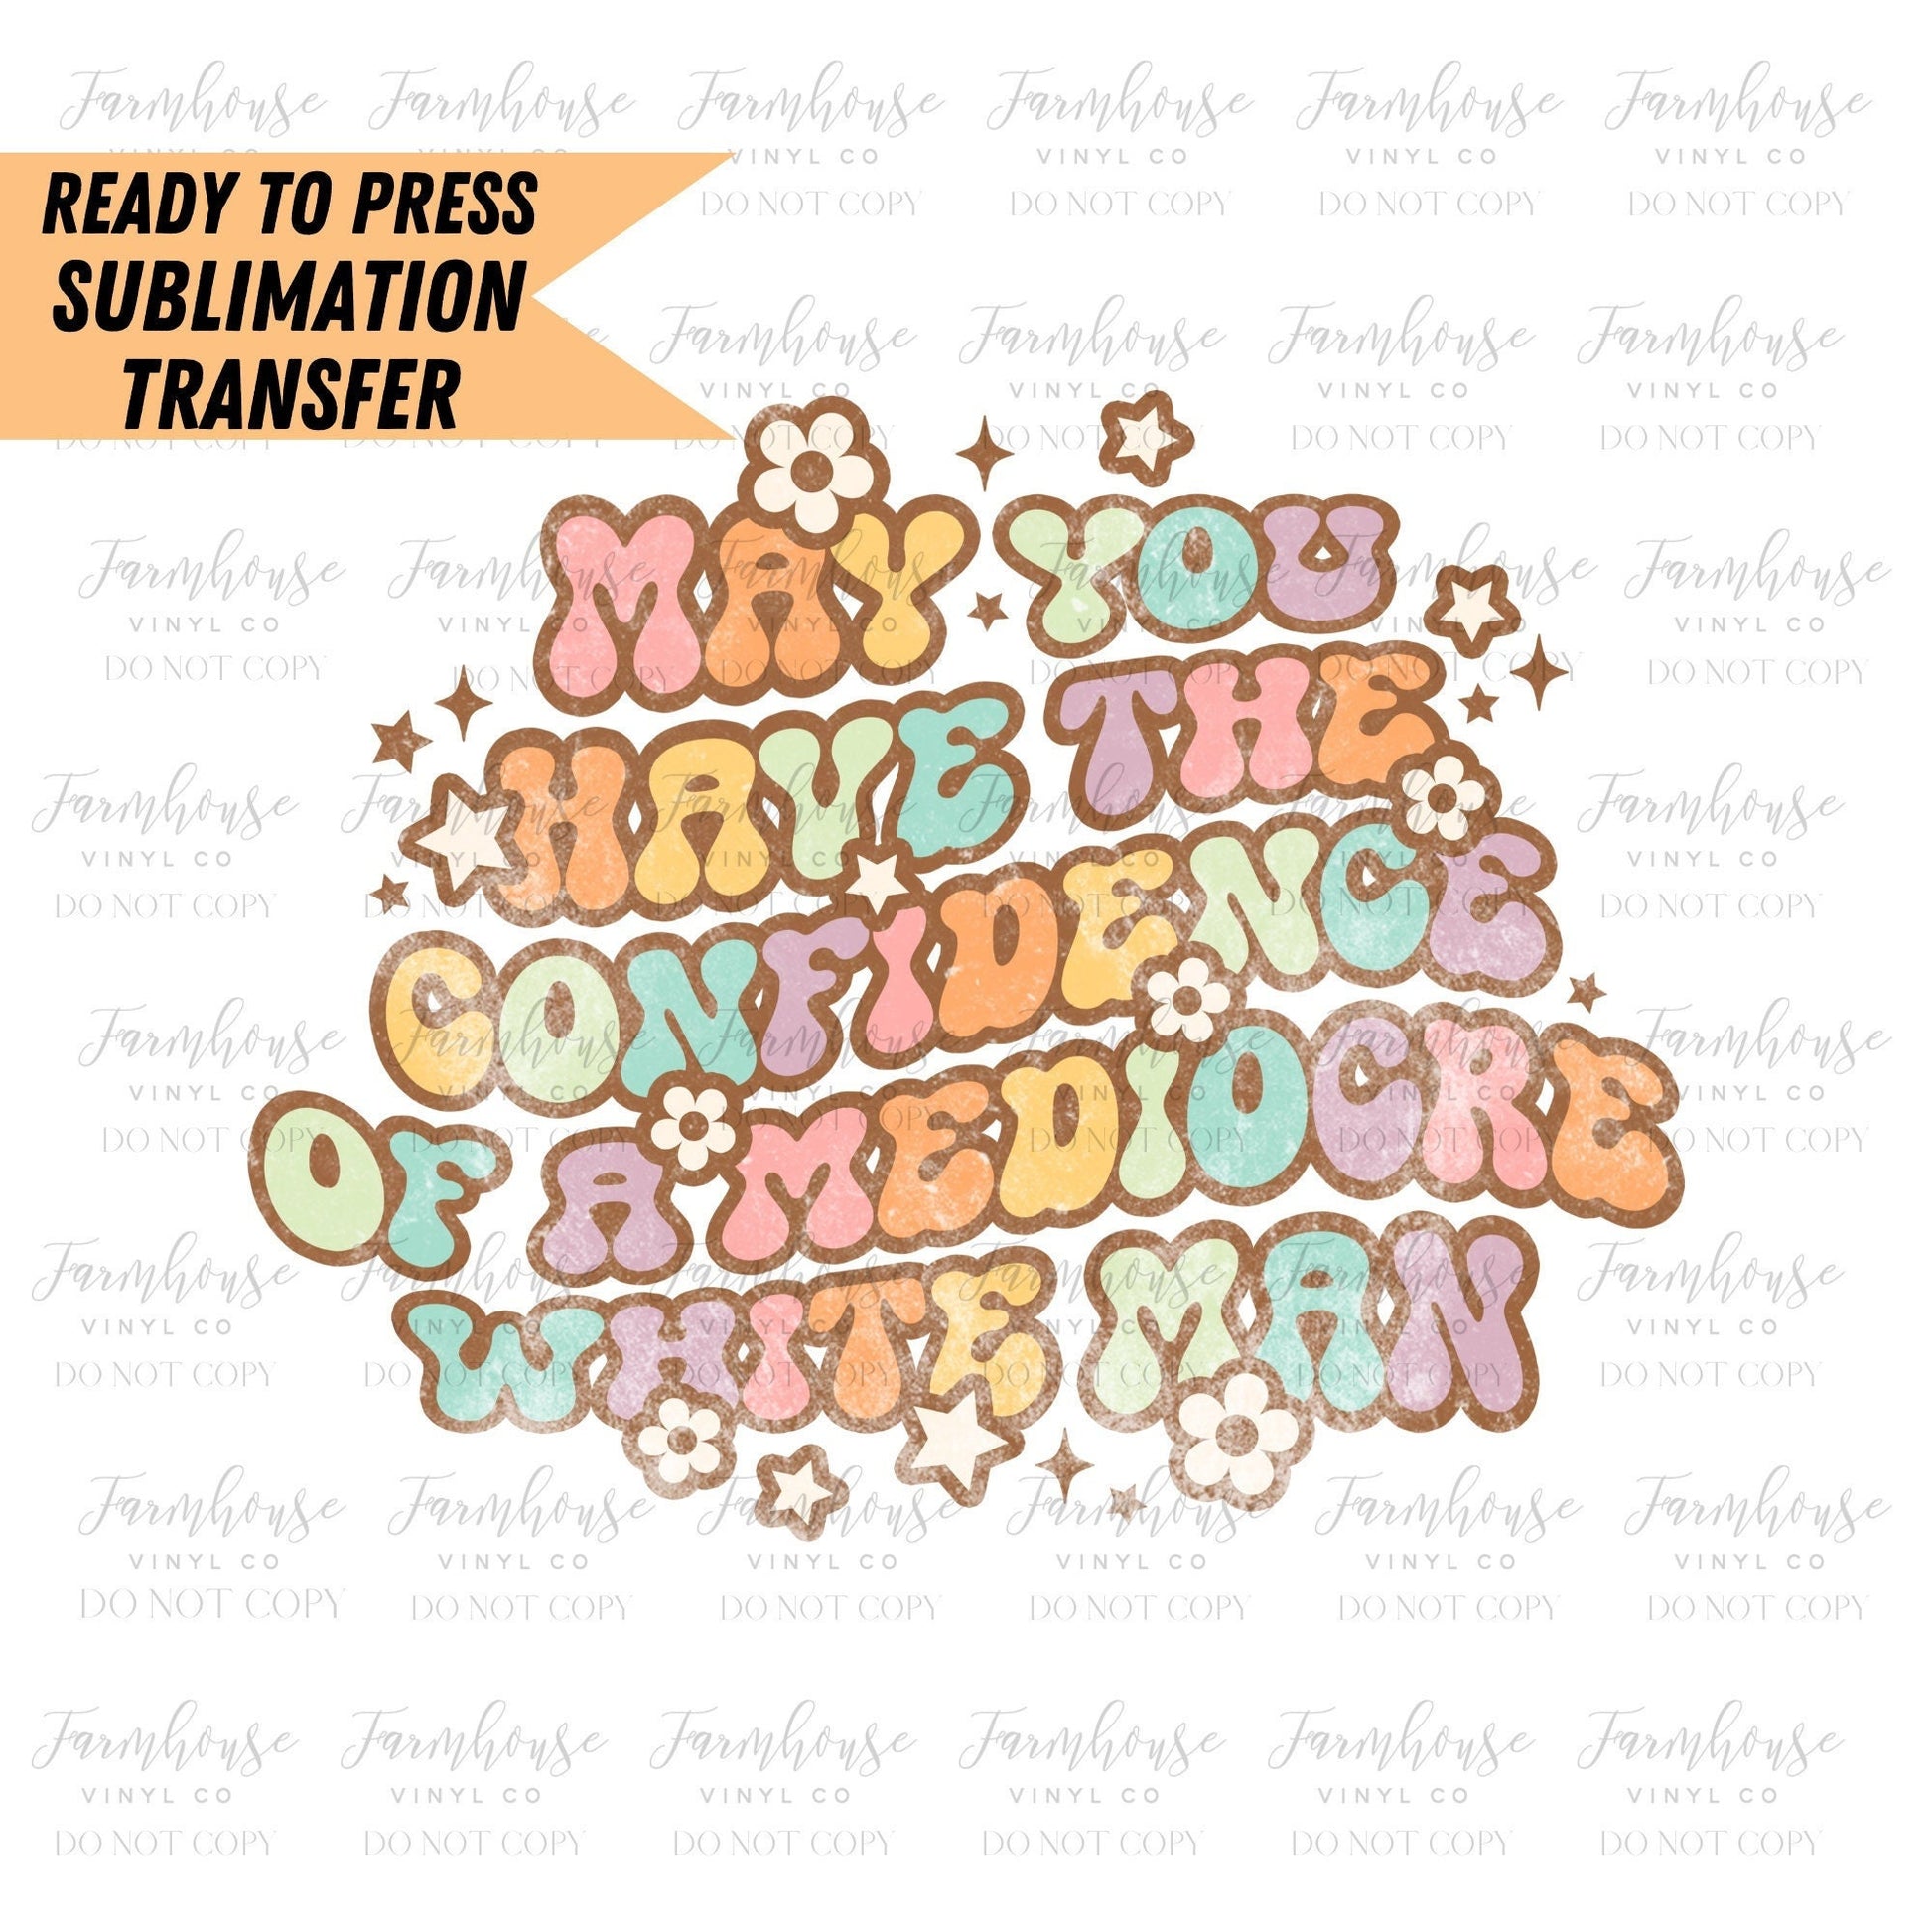 May You Have the Confidence of A Mediocre White Man, Ready To Press, Sublimation Transfers, Sublimation Print, Women's Rights, Feminist - Farmhouse Vinyl Co